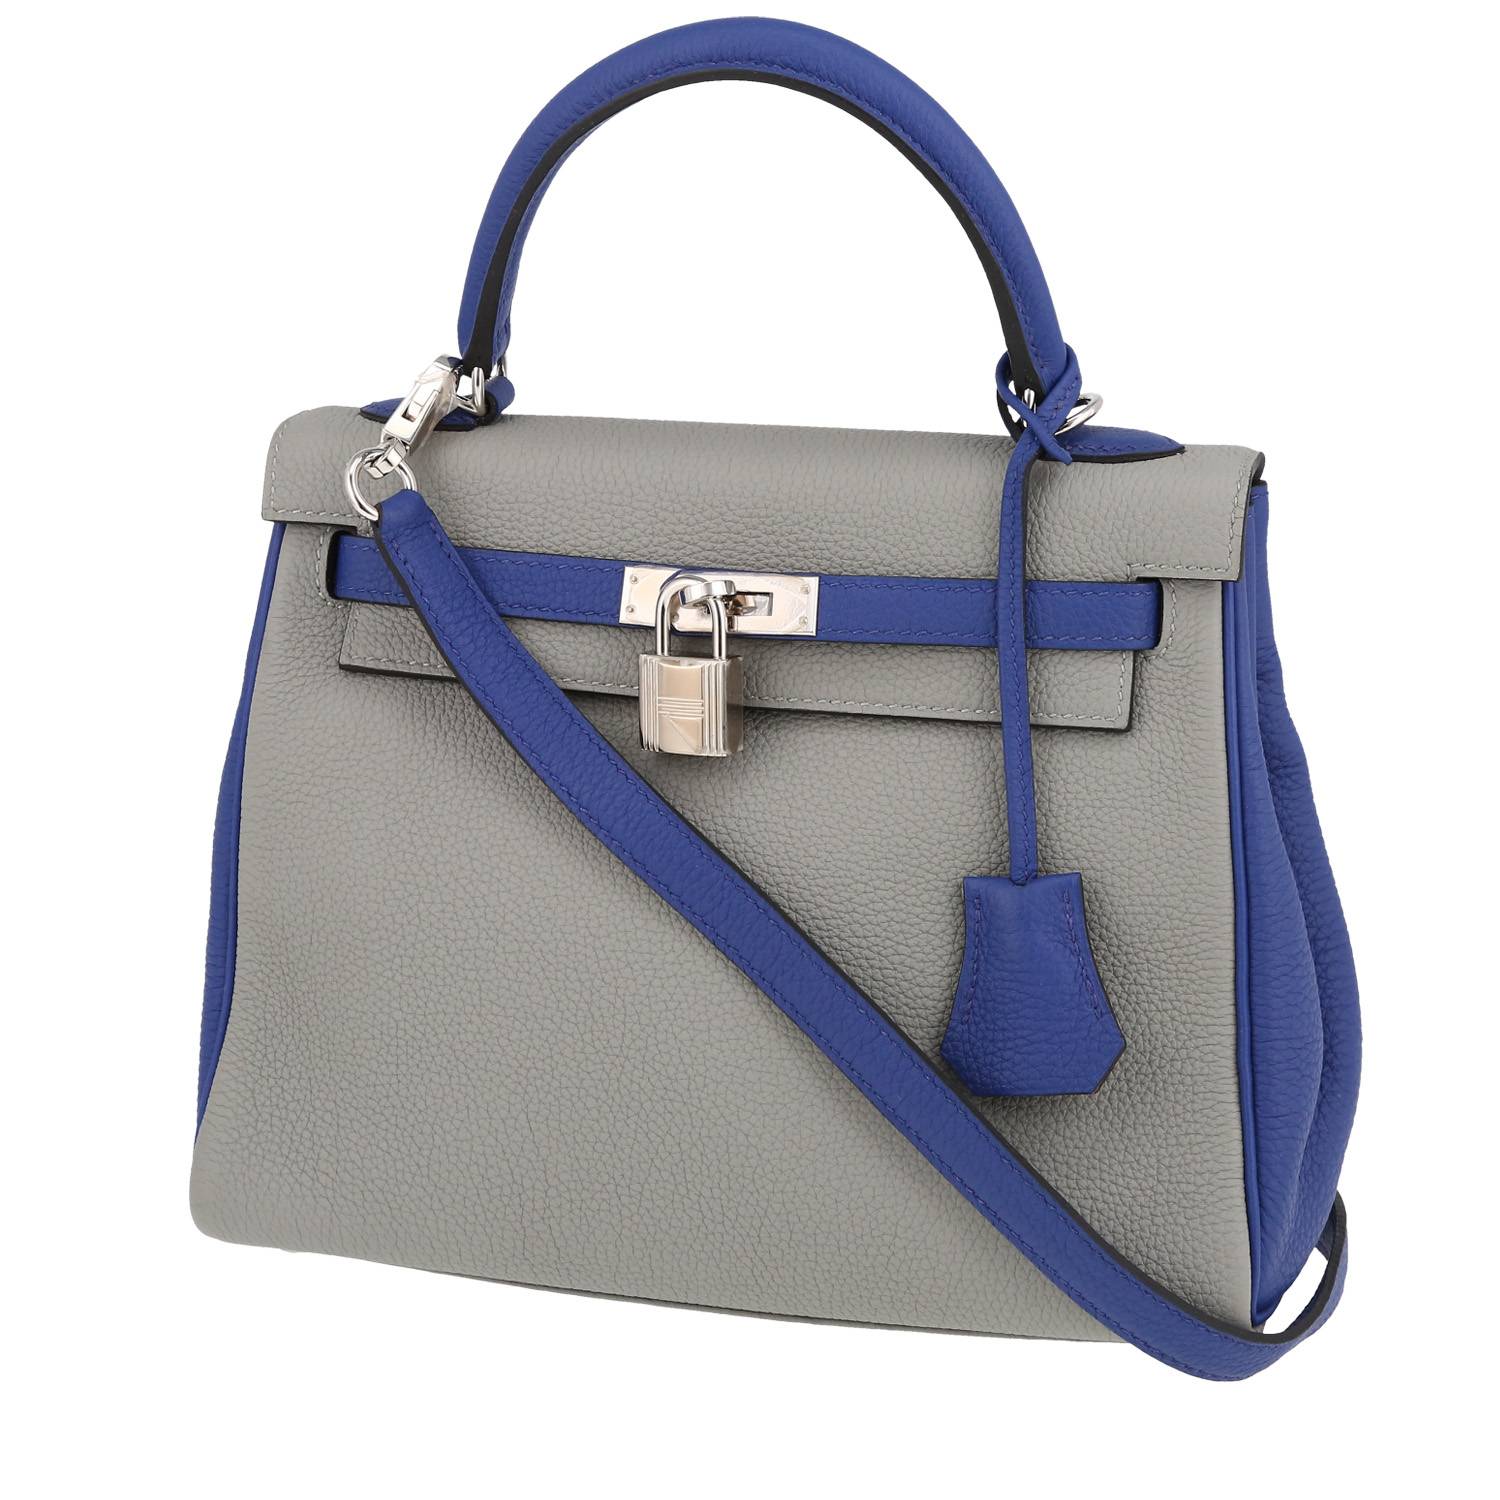 Hermès Kelly 25 cm Handbag in Gris Mouette and Electric Blue Togo